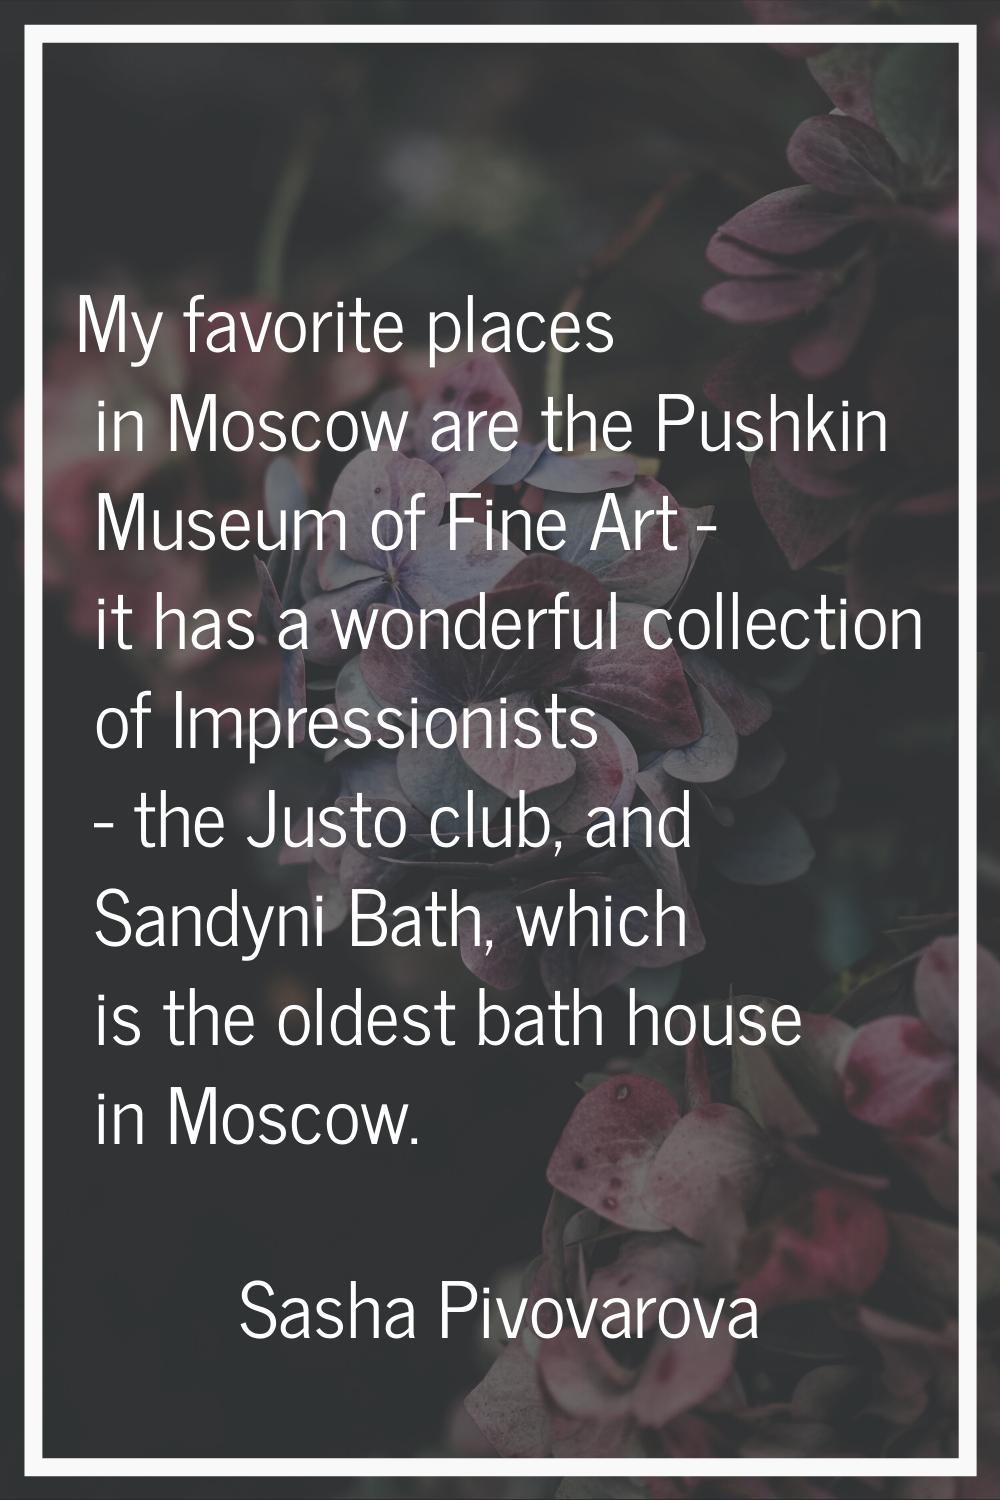 My favorite places in Moscow are the Pushkin Museum of Fine Art - it has a wonderful collection of 